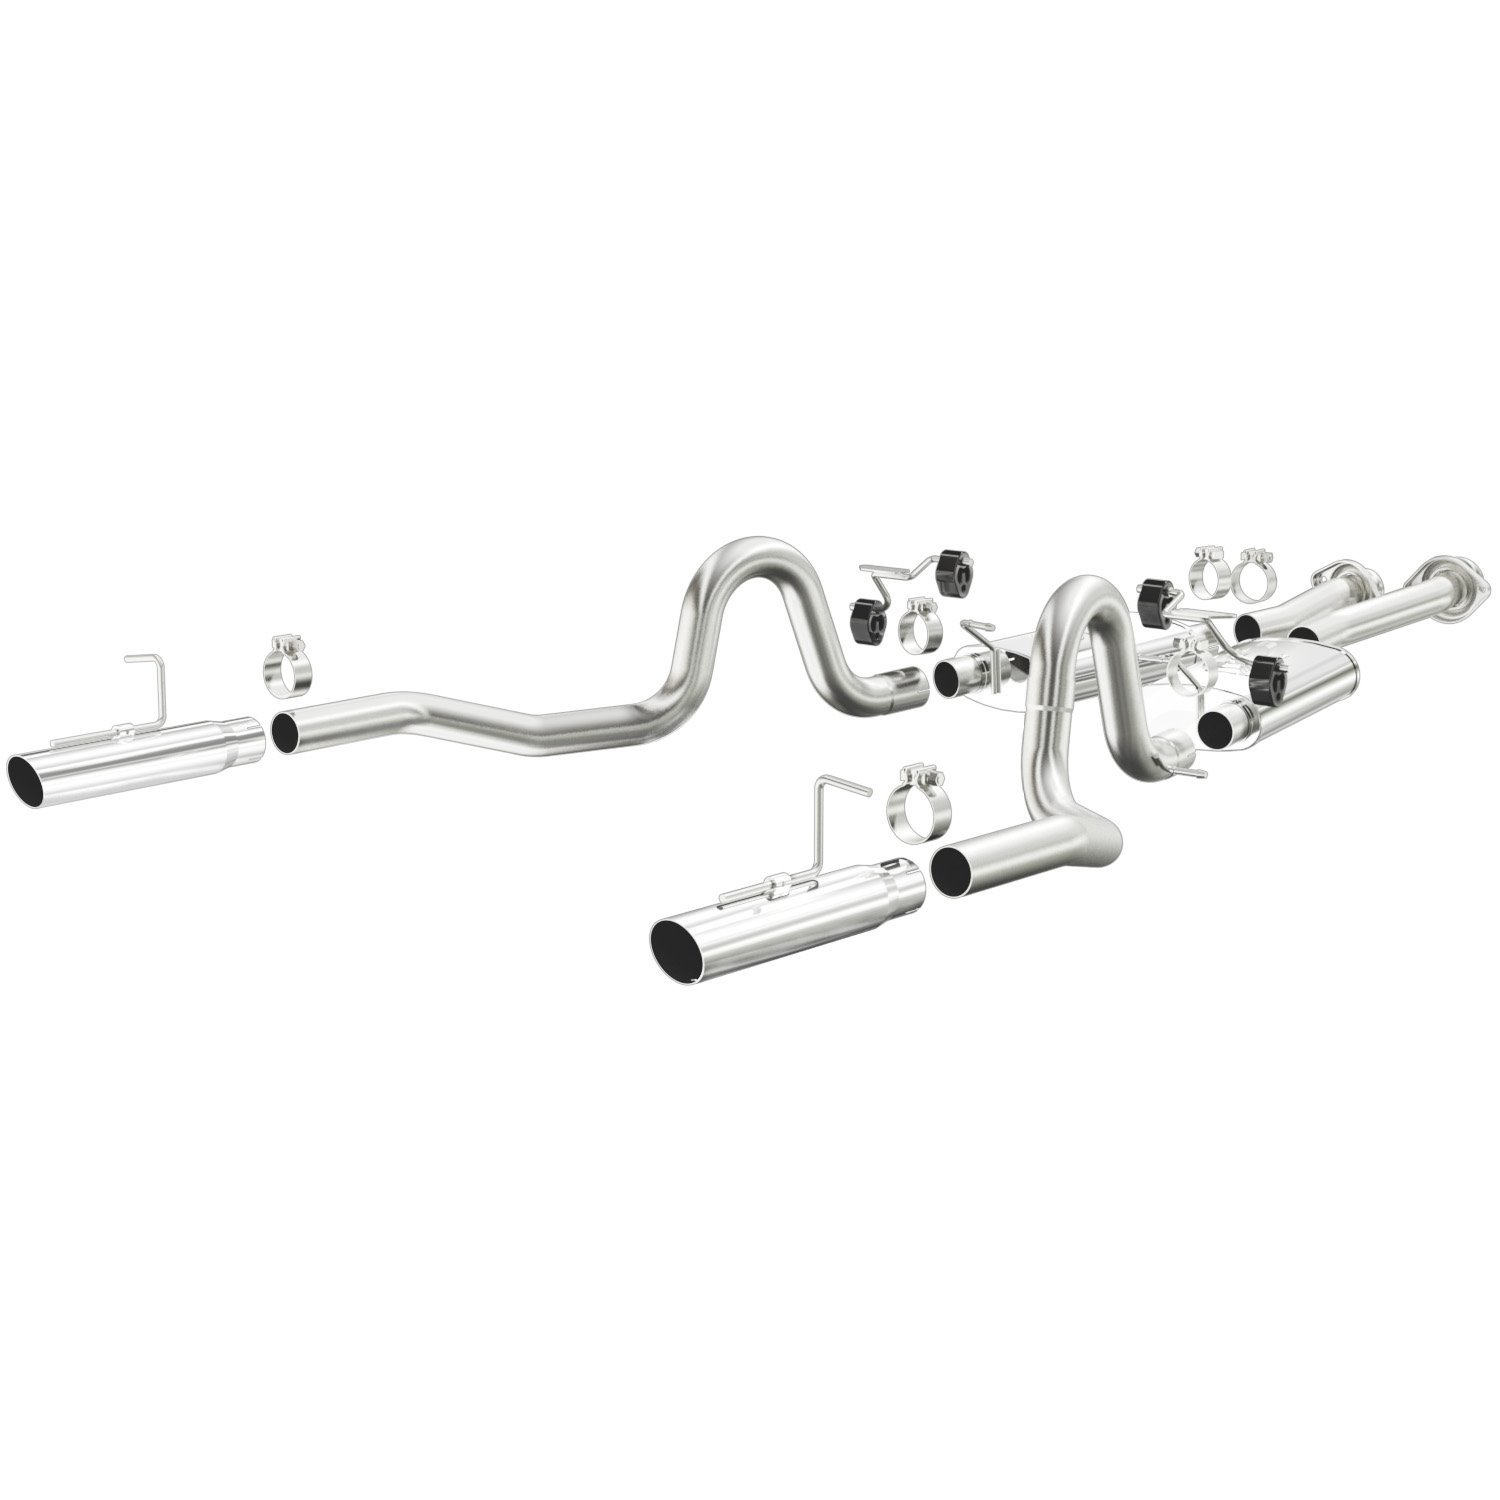 Street Series Cat-Back Exhaust System 1986 Mustang GT/LX